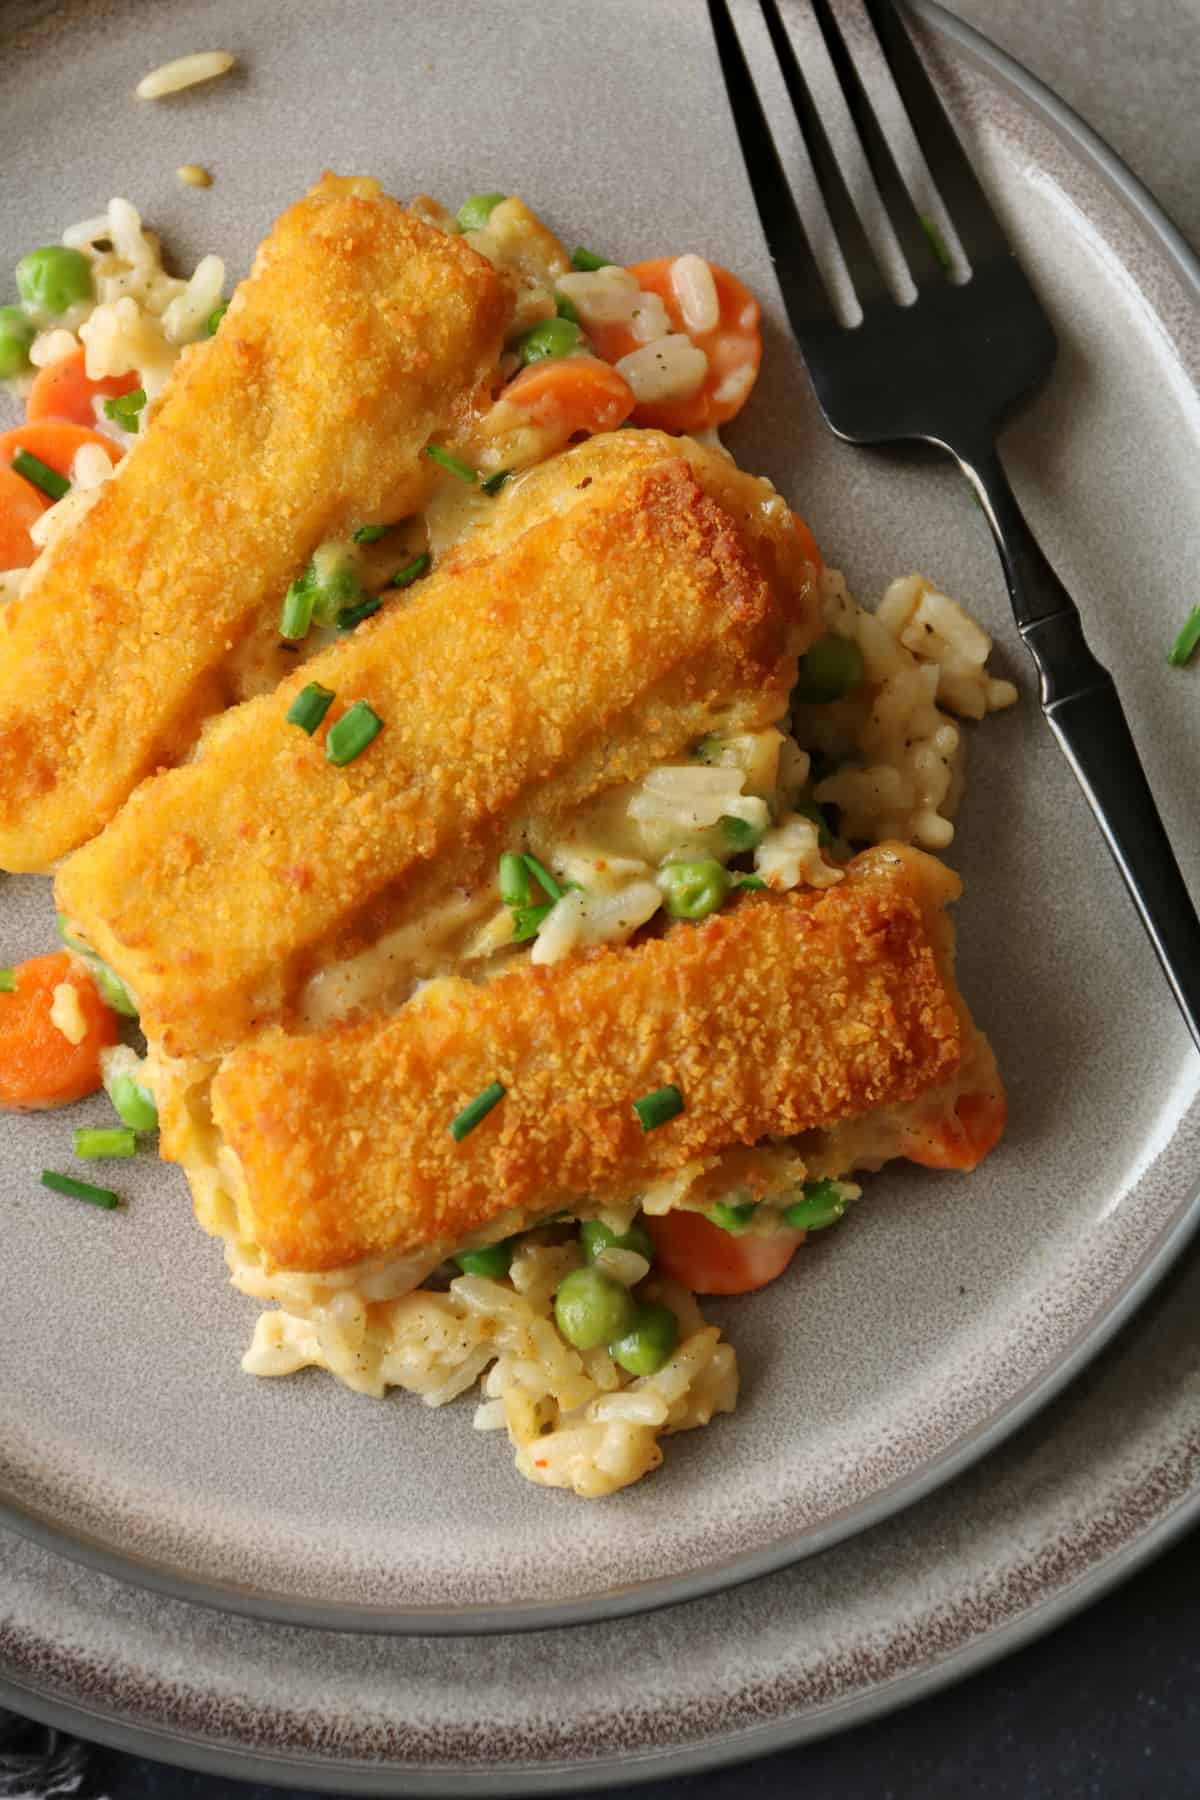 A close-up of a plate of fish finger pie.